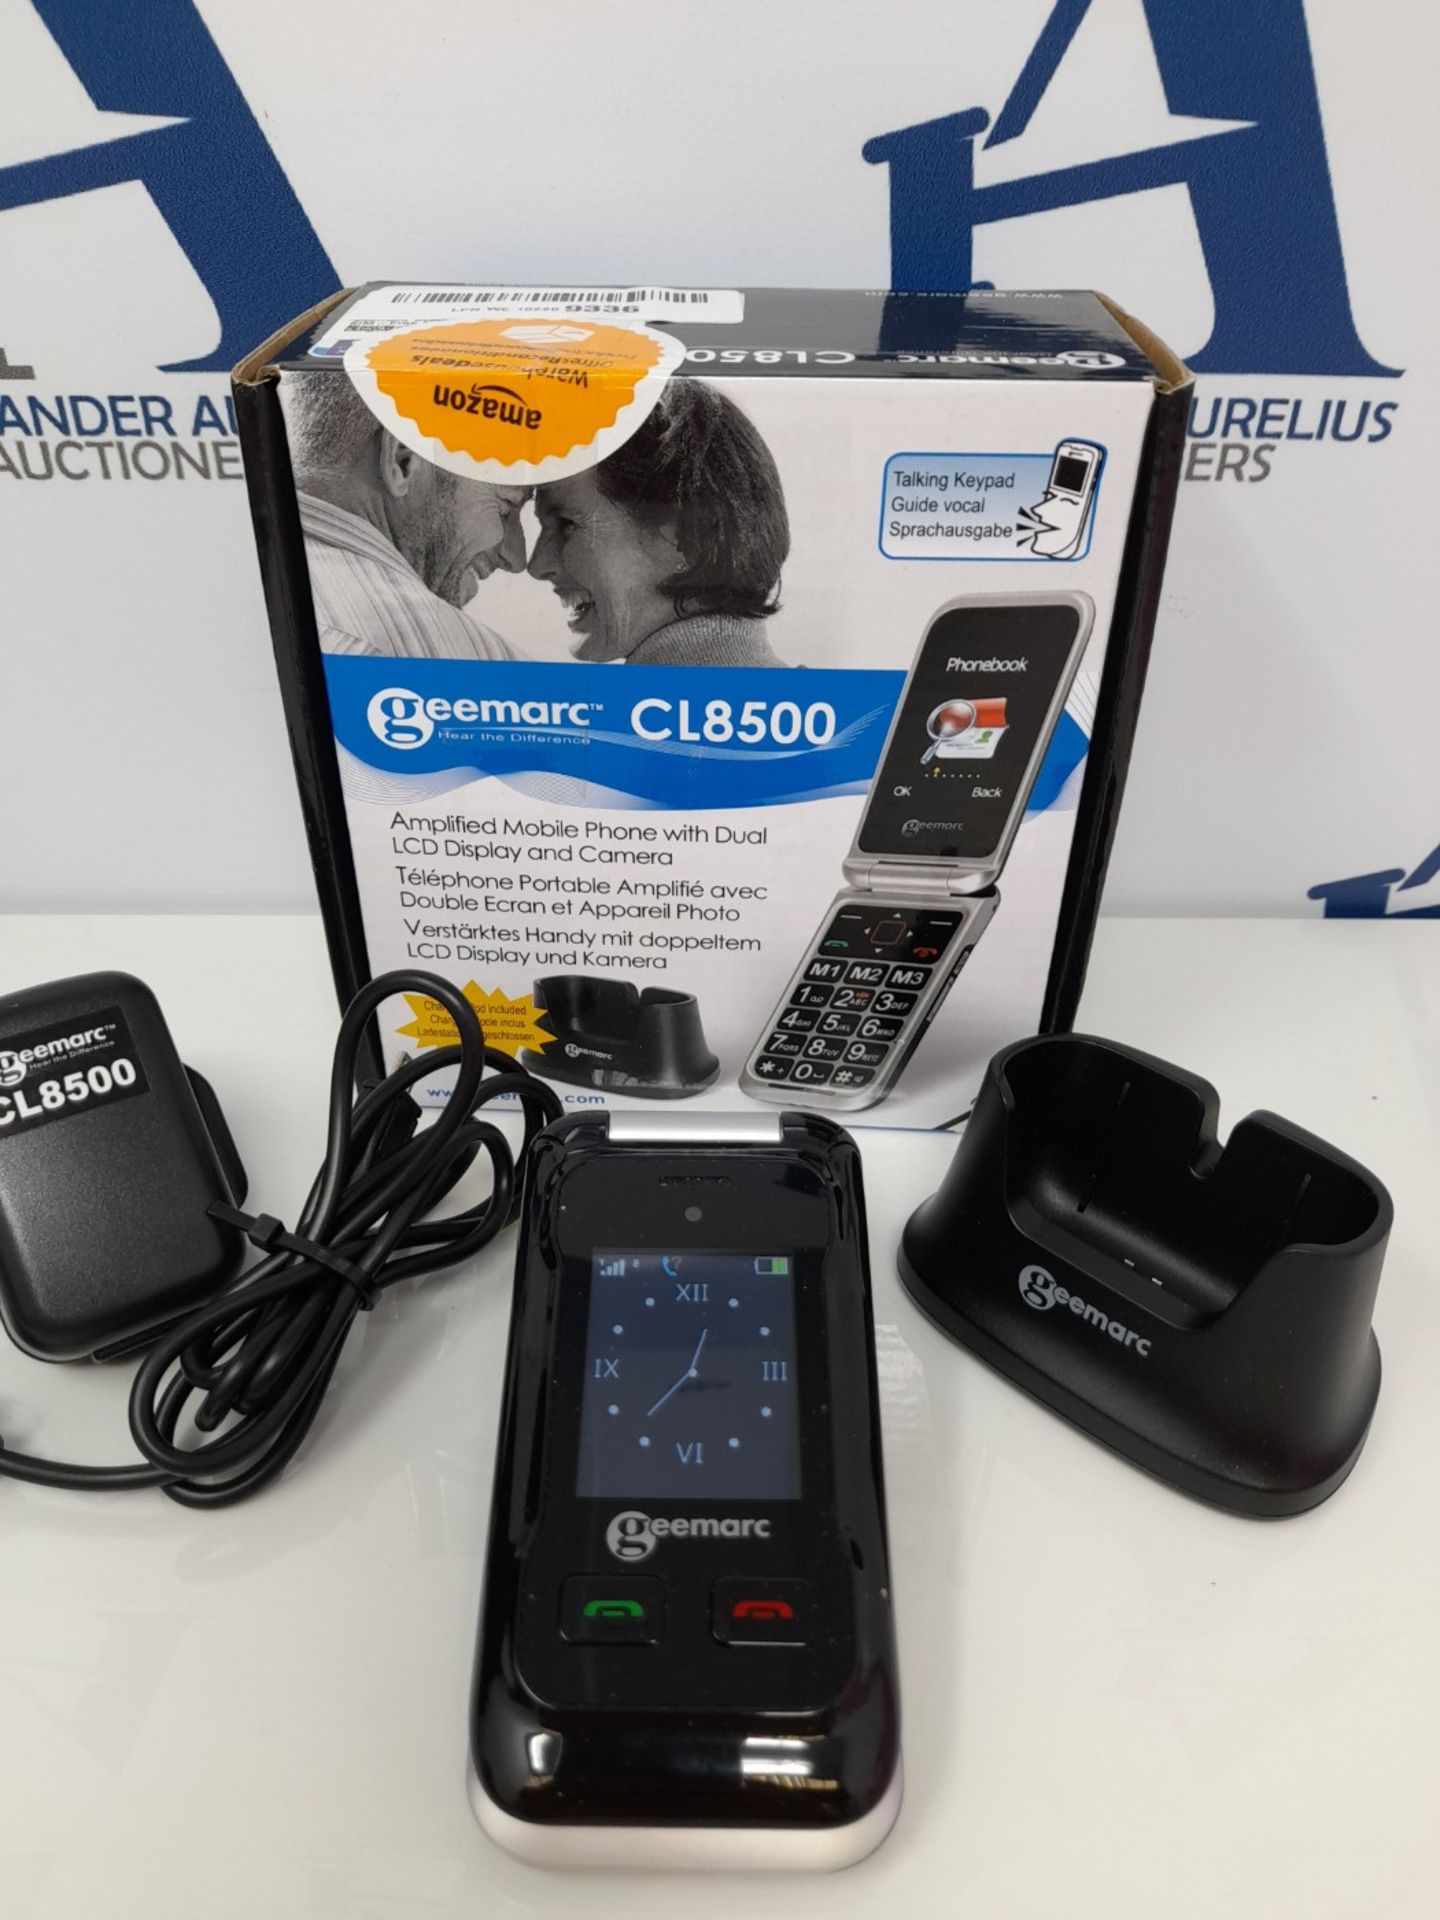 RRP £69.00 Geemarc CL8500 - Amplified Big Button Clamshell SIM-Free Mobile Phone with Dual LCD Di - Image 2 of 3